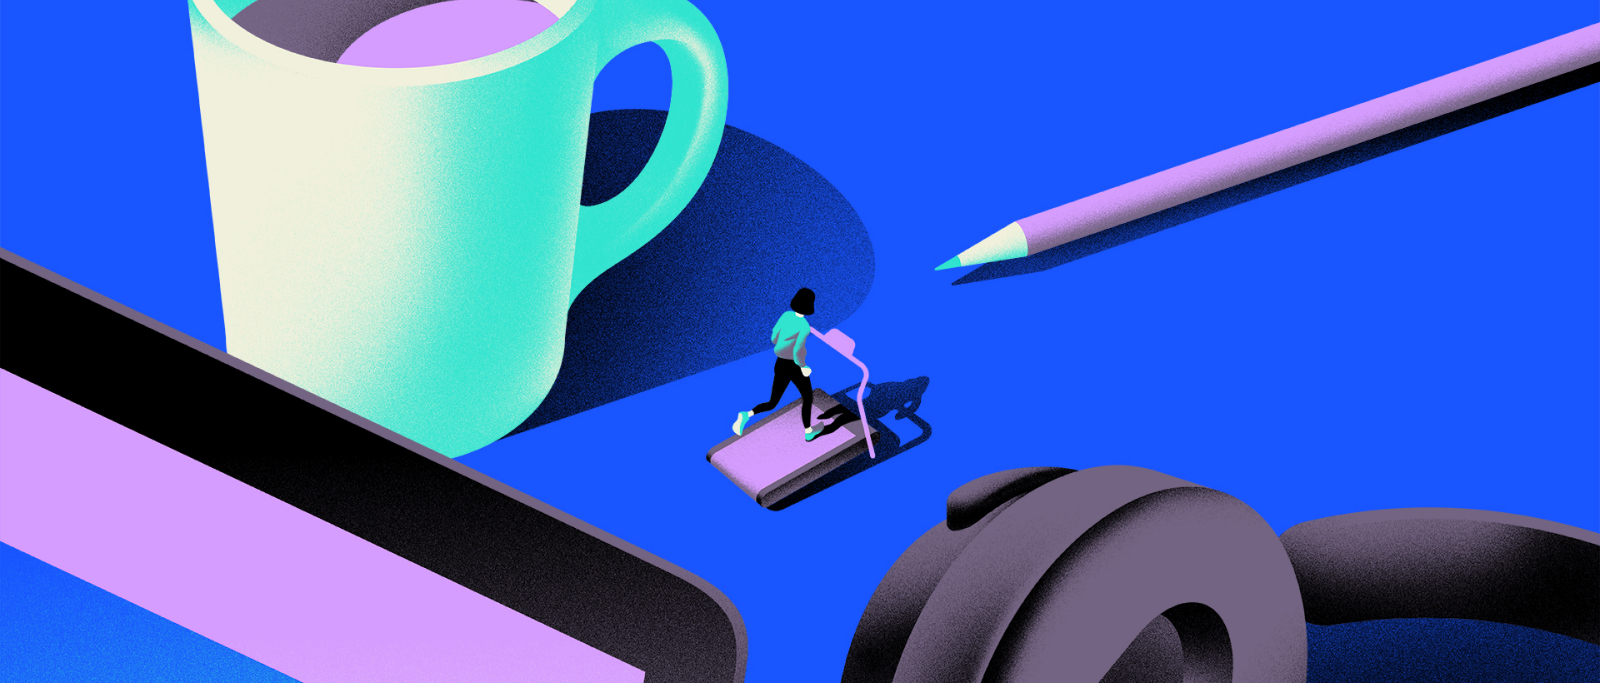 Illustration depicts a workstation with laptop, coffee cup, headphones, and a tiny human being running on a treadmill